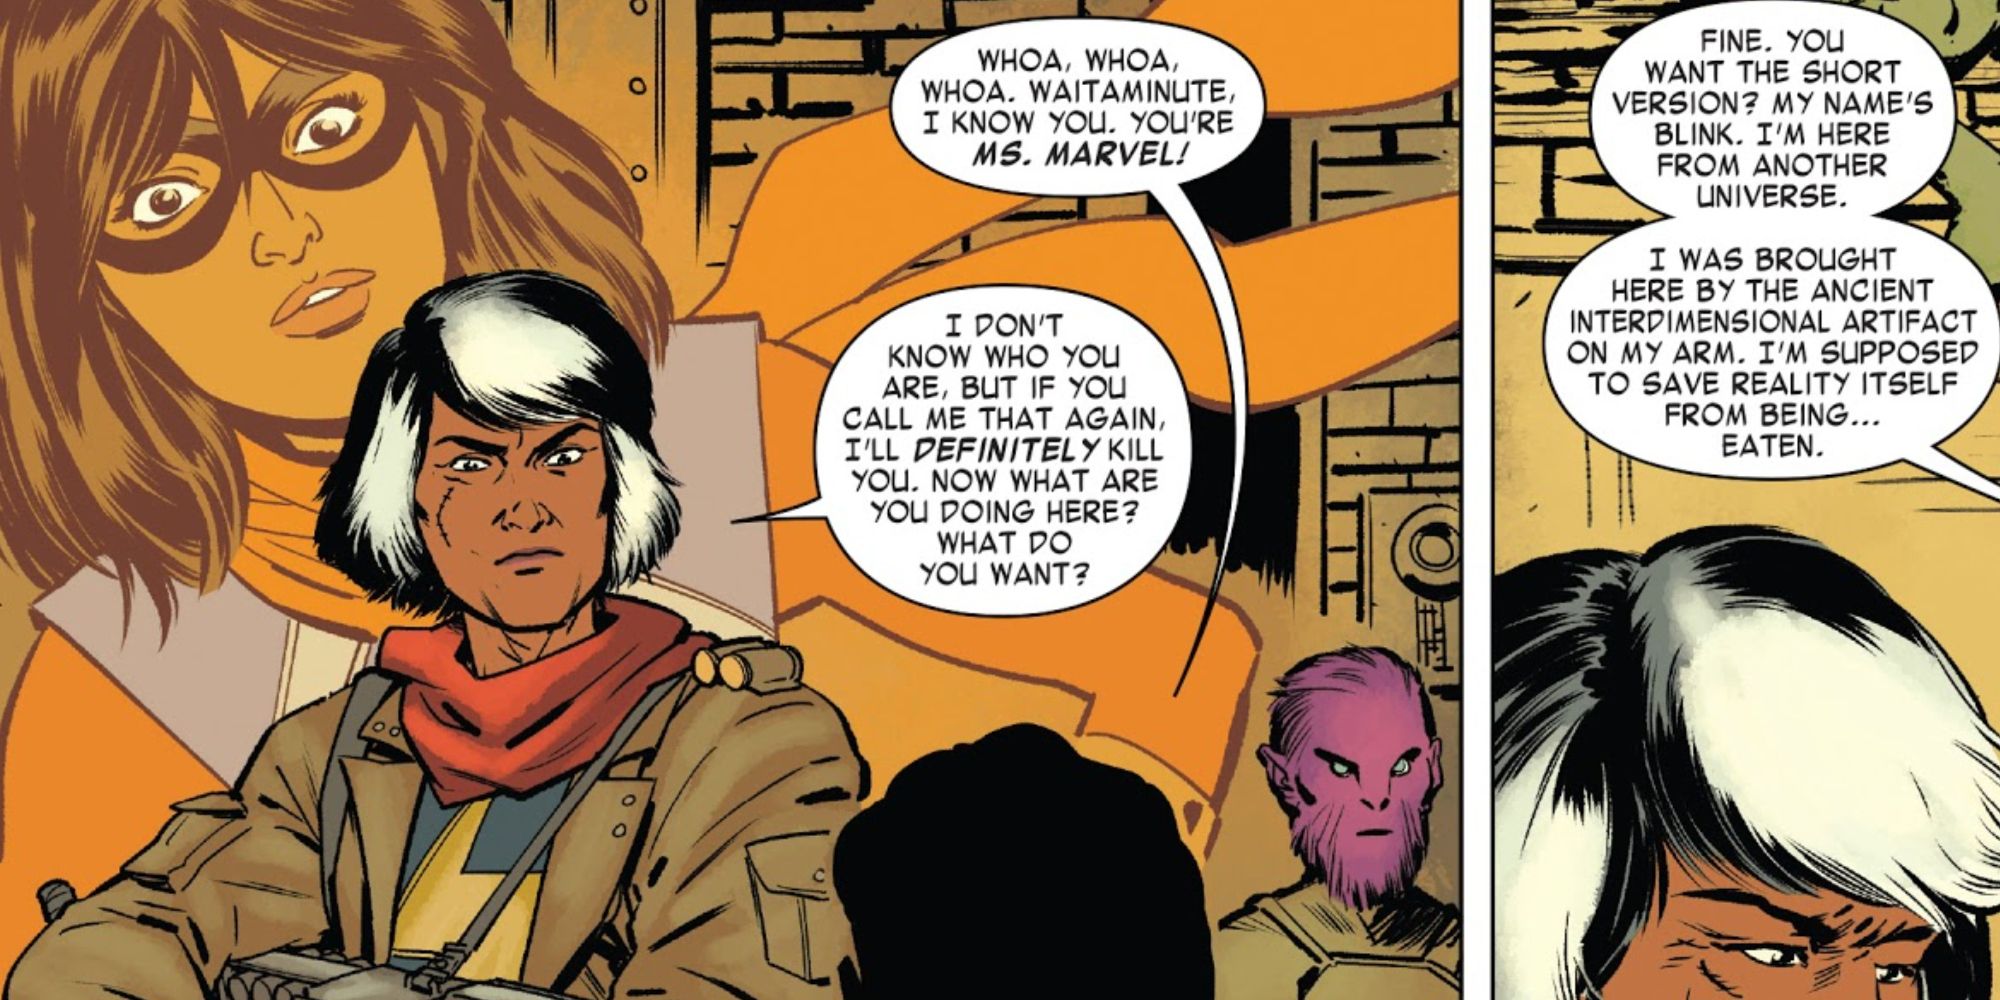 A Ms. Marvel variant appears in Exiles comics.